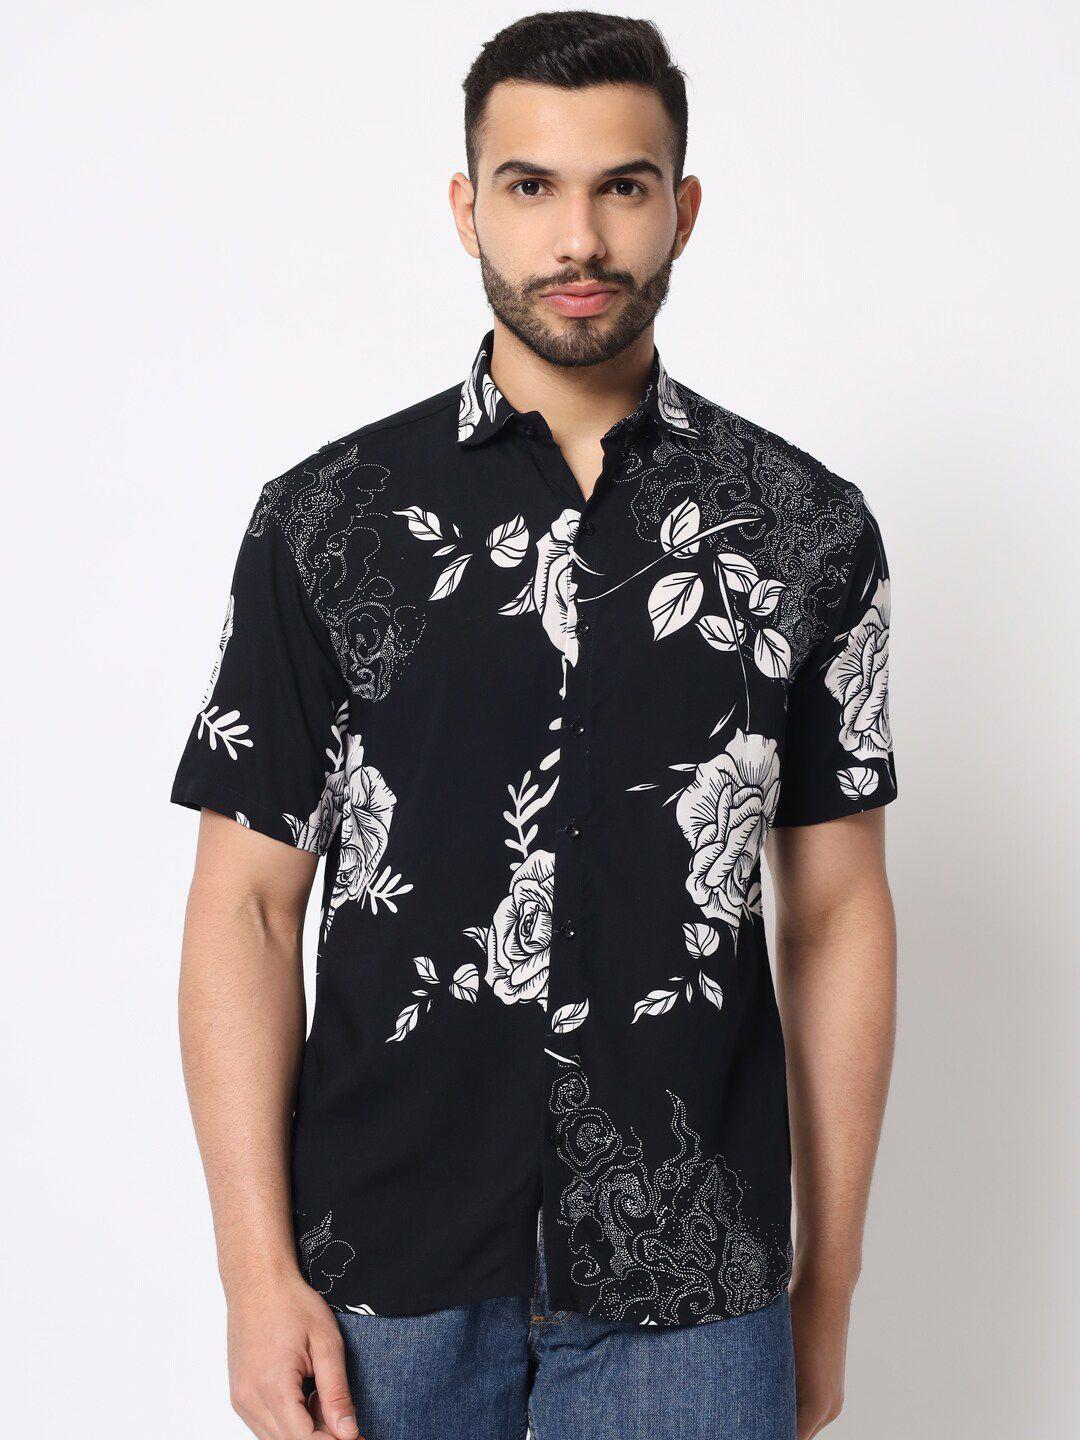 lakaala men relaxed floral printed casual cotton shirt